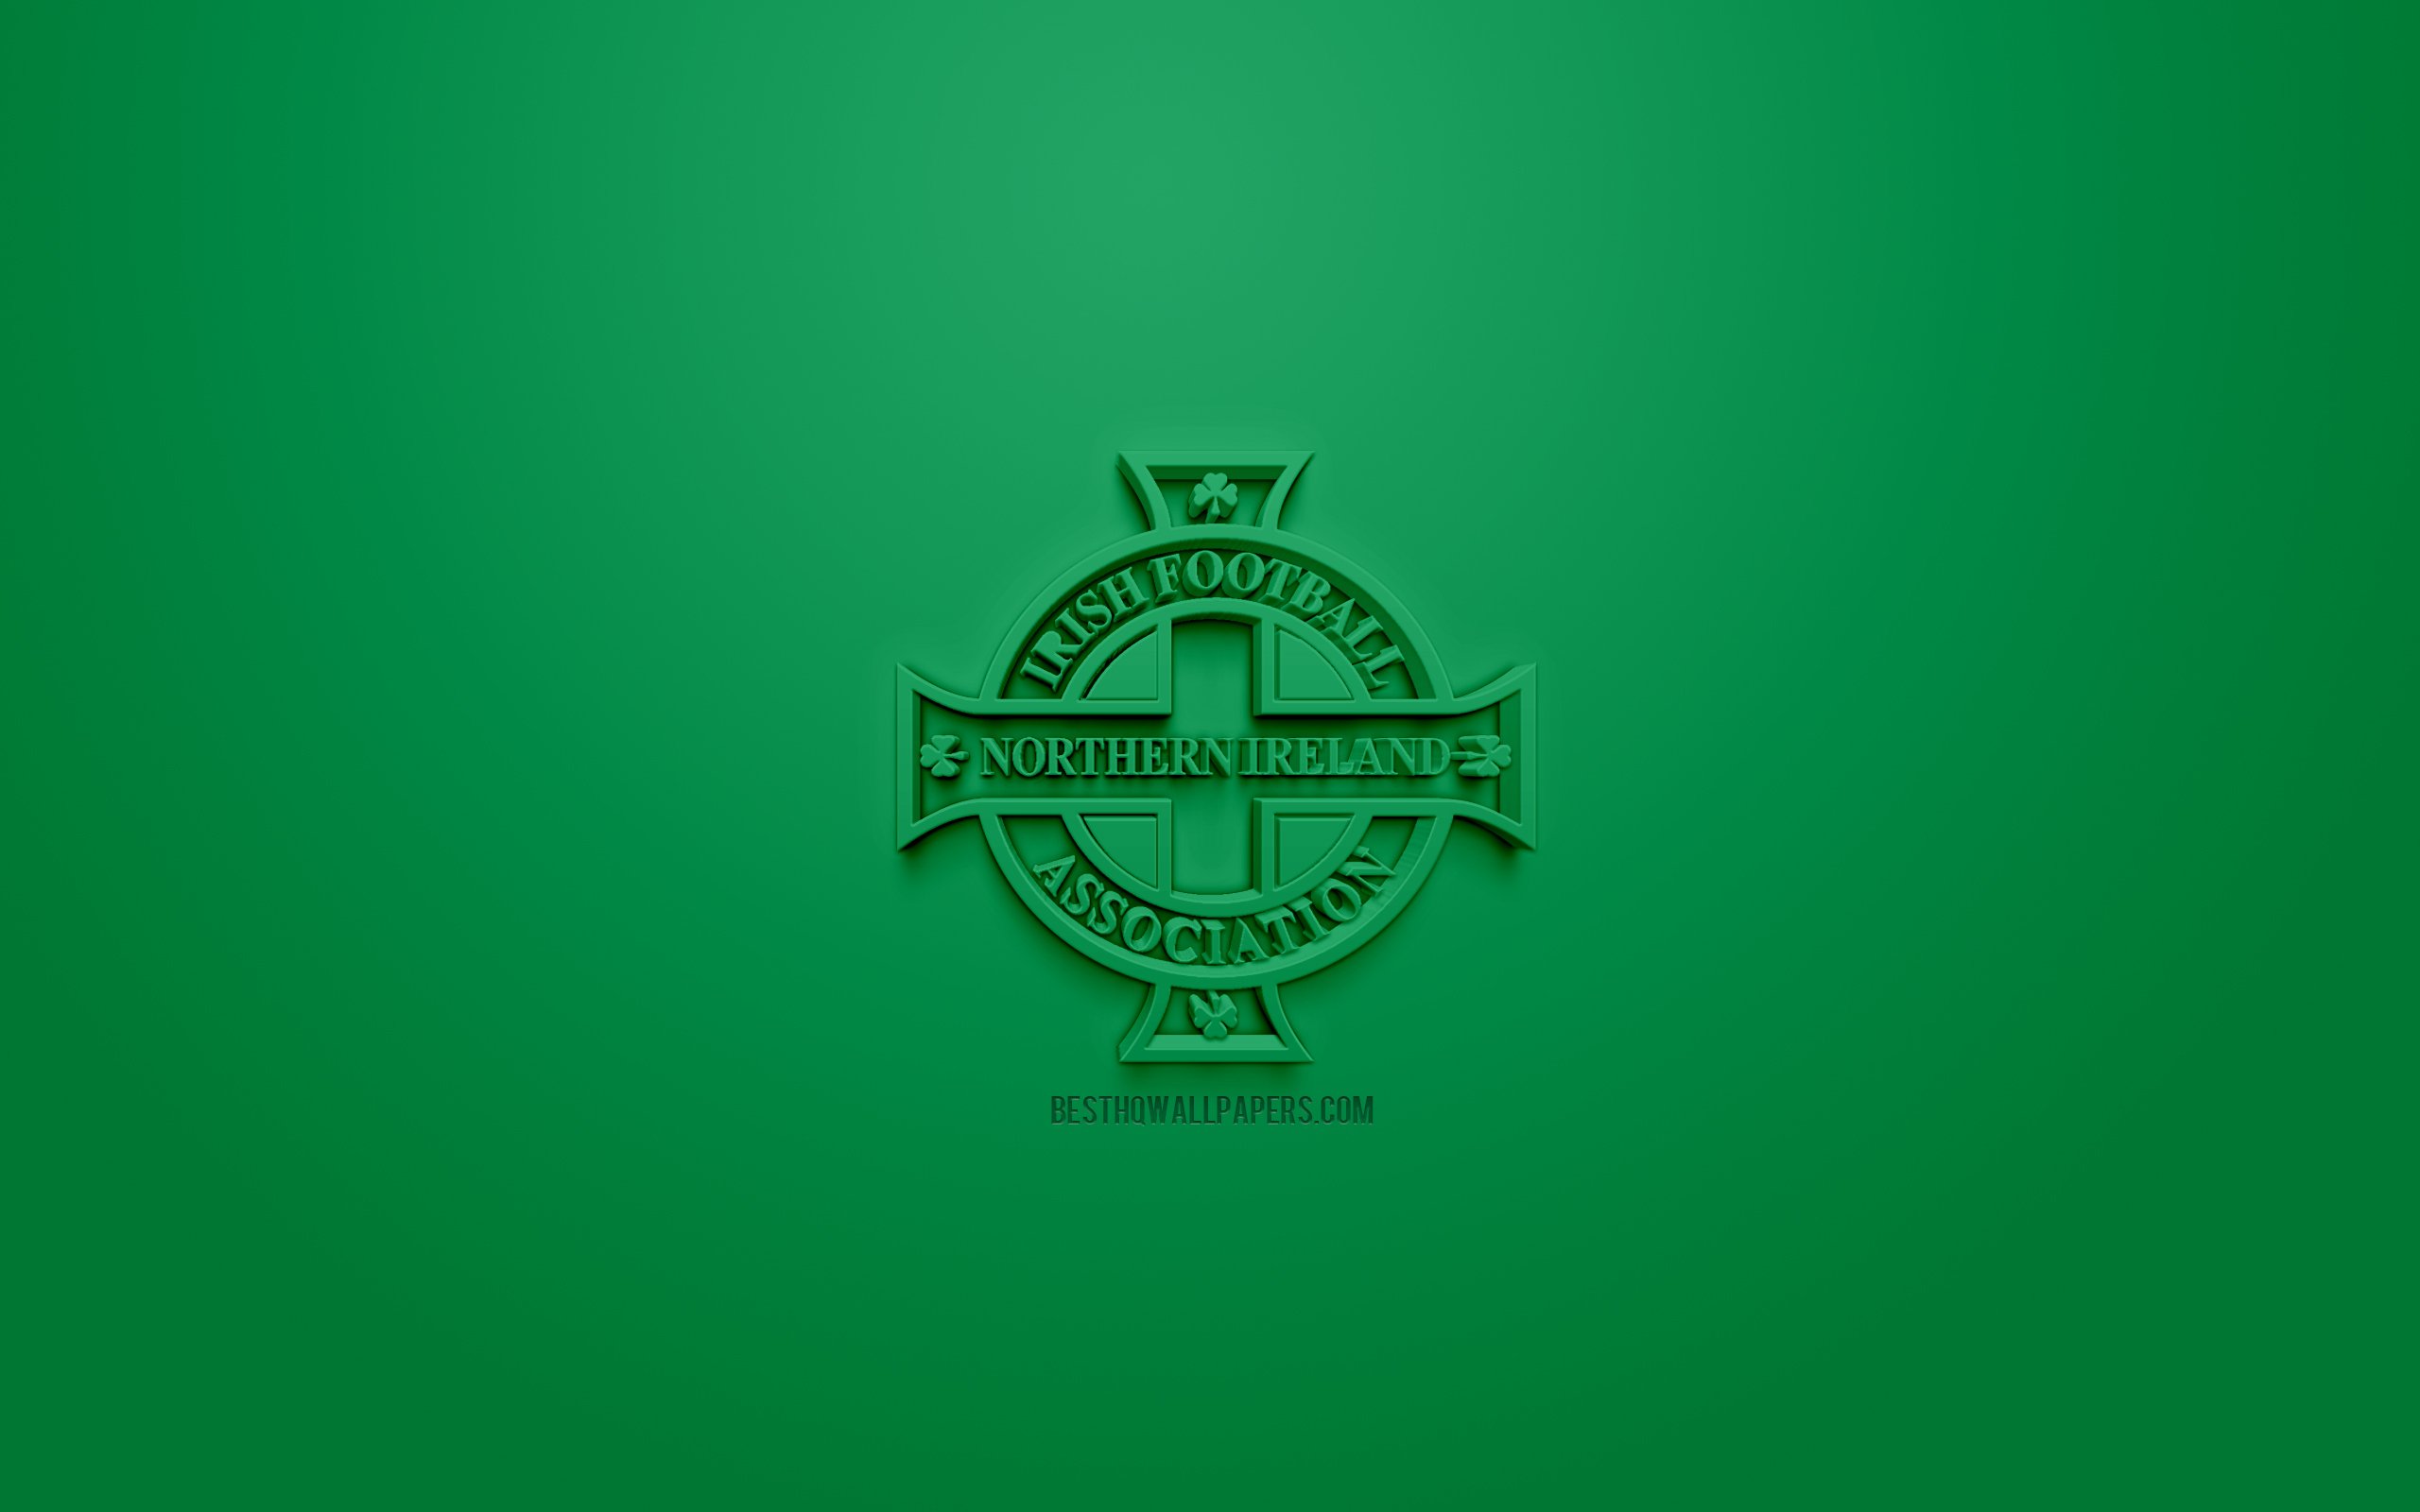 Download wallpaper Northern Ireland national football team, creative 3D logo, green background, 3D emblem, Northern Ireland, Europe, UEFA, 3D art, football, stylish 3D logo for desktop with resolution 2560x1600. High Quality HD